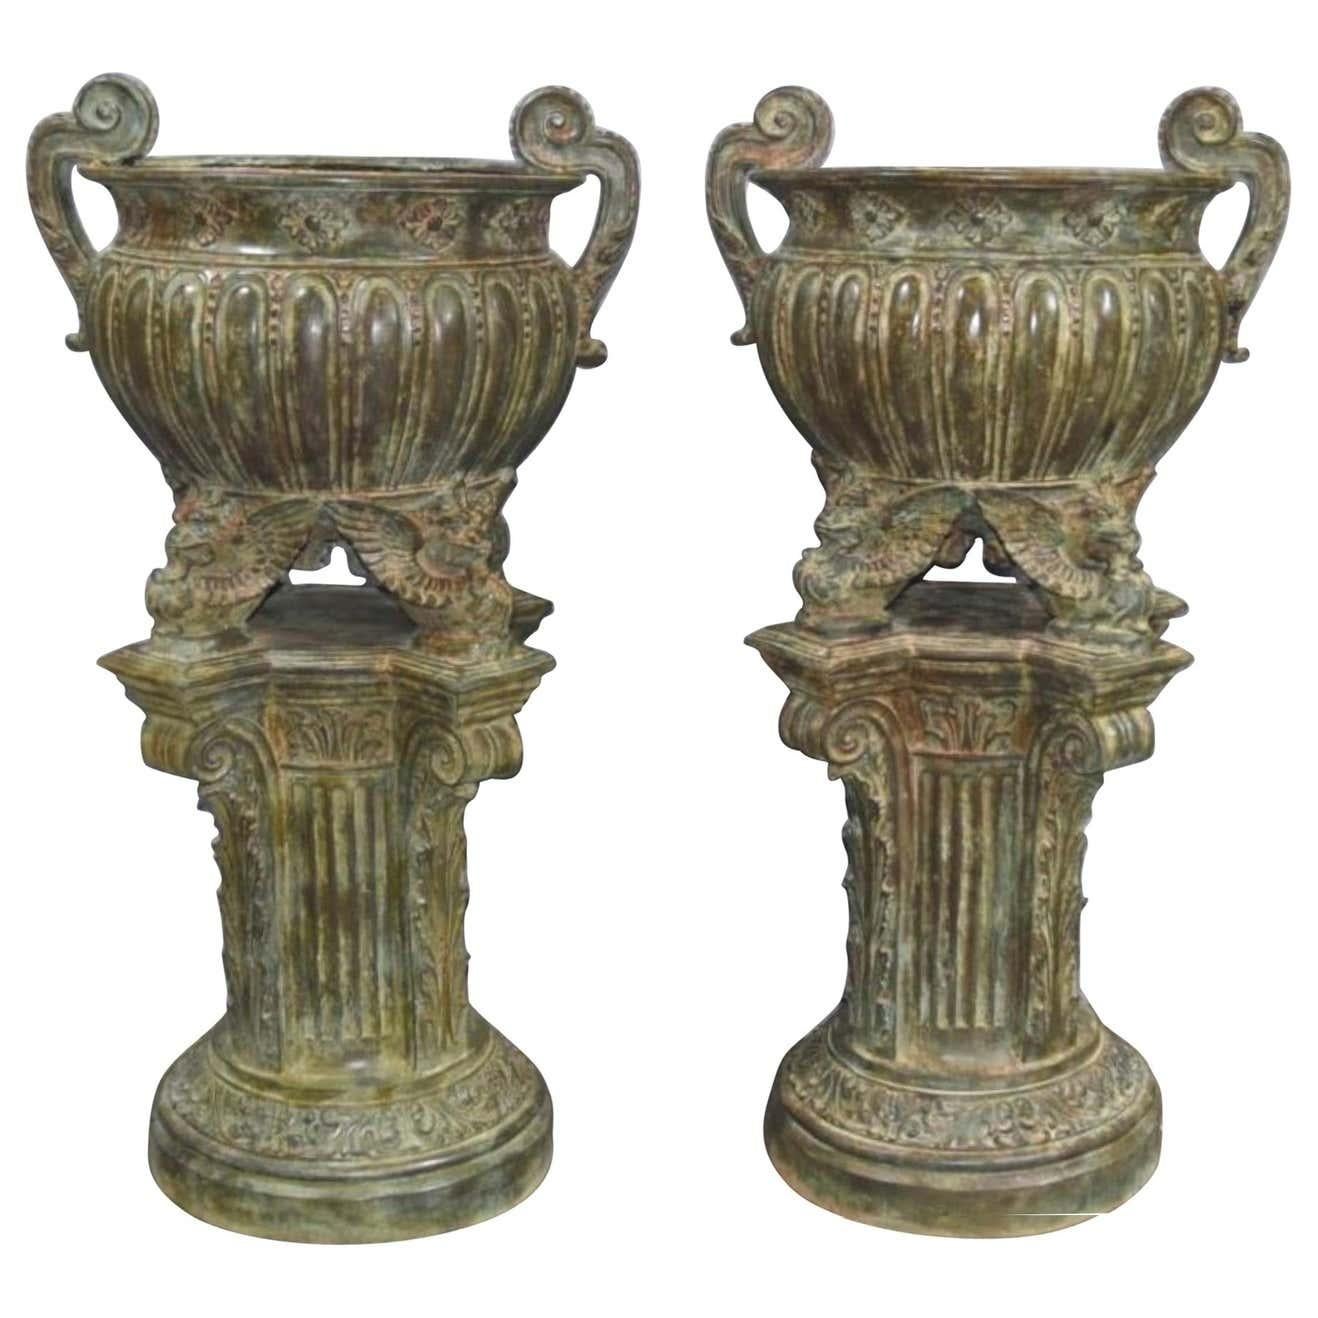 A stunning pair of French Empire style garden urns in bronze, 20th century. Amazing architectural pair, can you imagine these in your garden overflowing with flowers. Stand in at nearly five feet tall so good size. Lovely Verdigris patina and